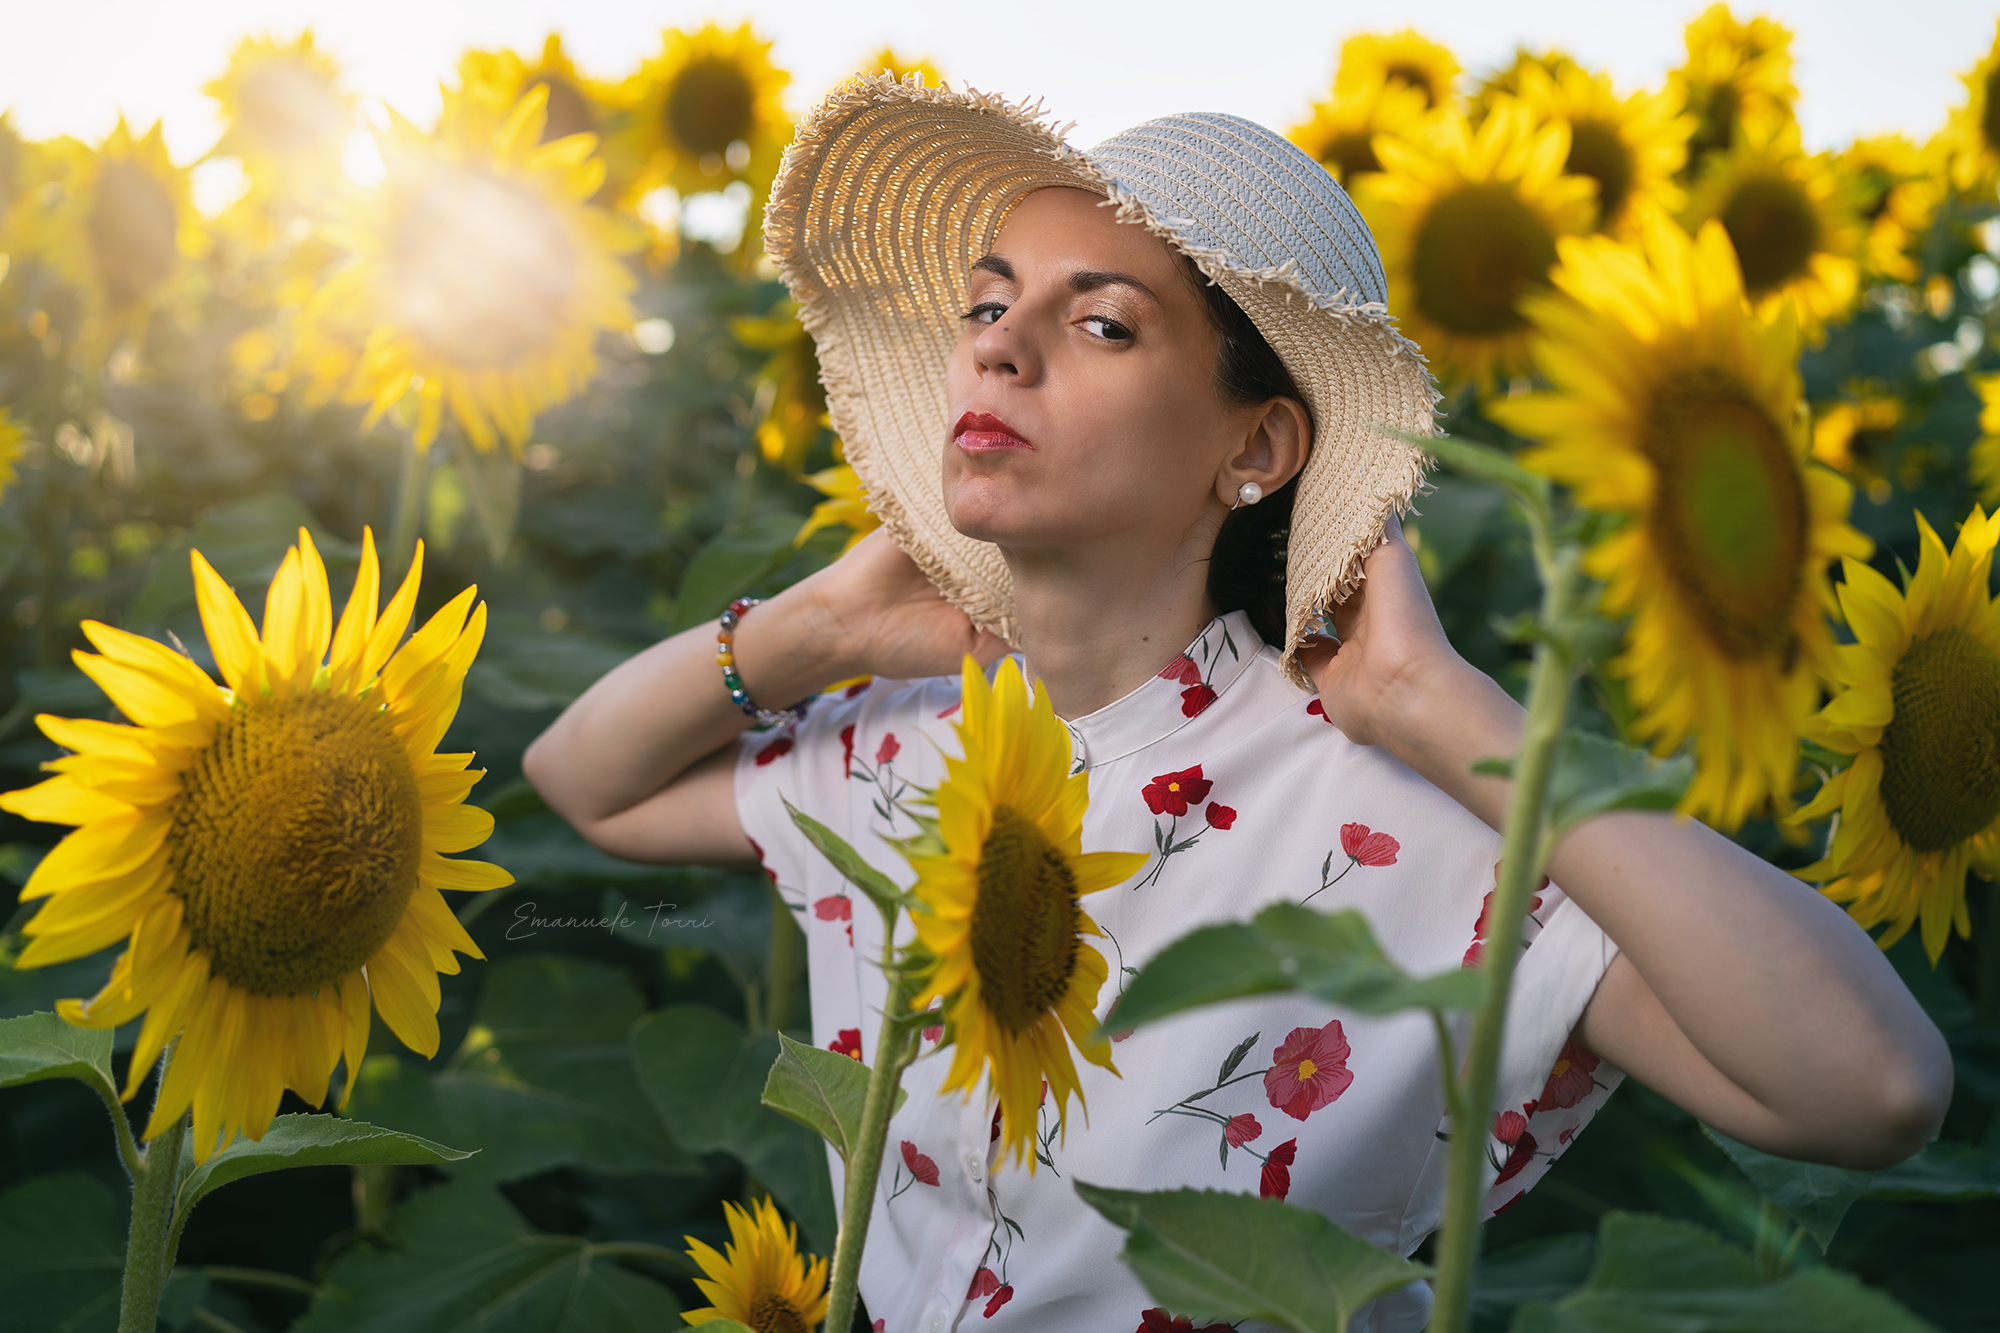 Ilaria in the Sunflowers...